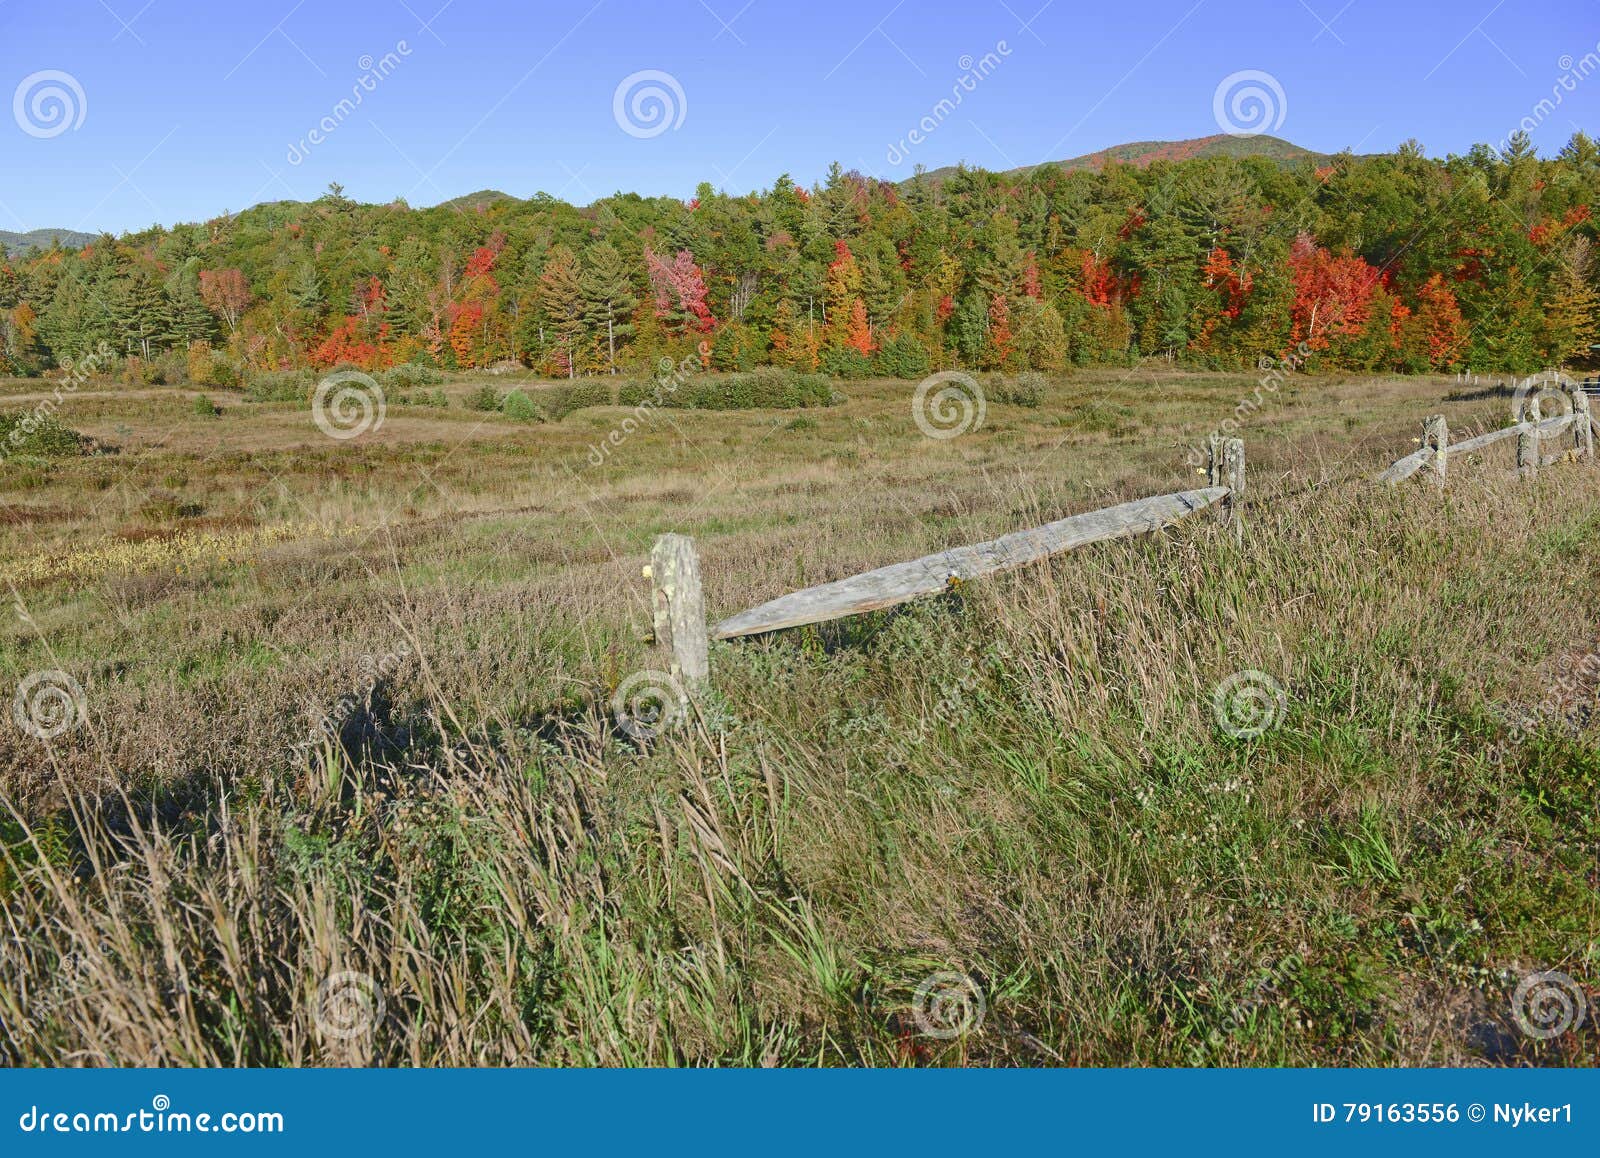 autumn foliage in a northeast forest